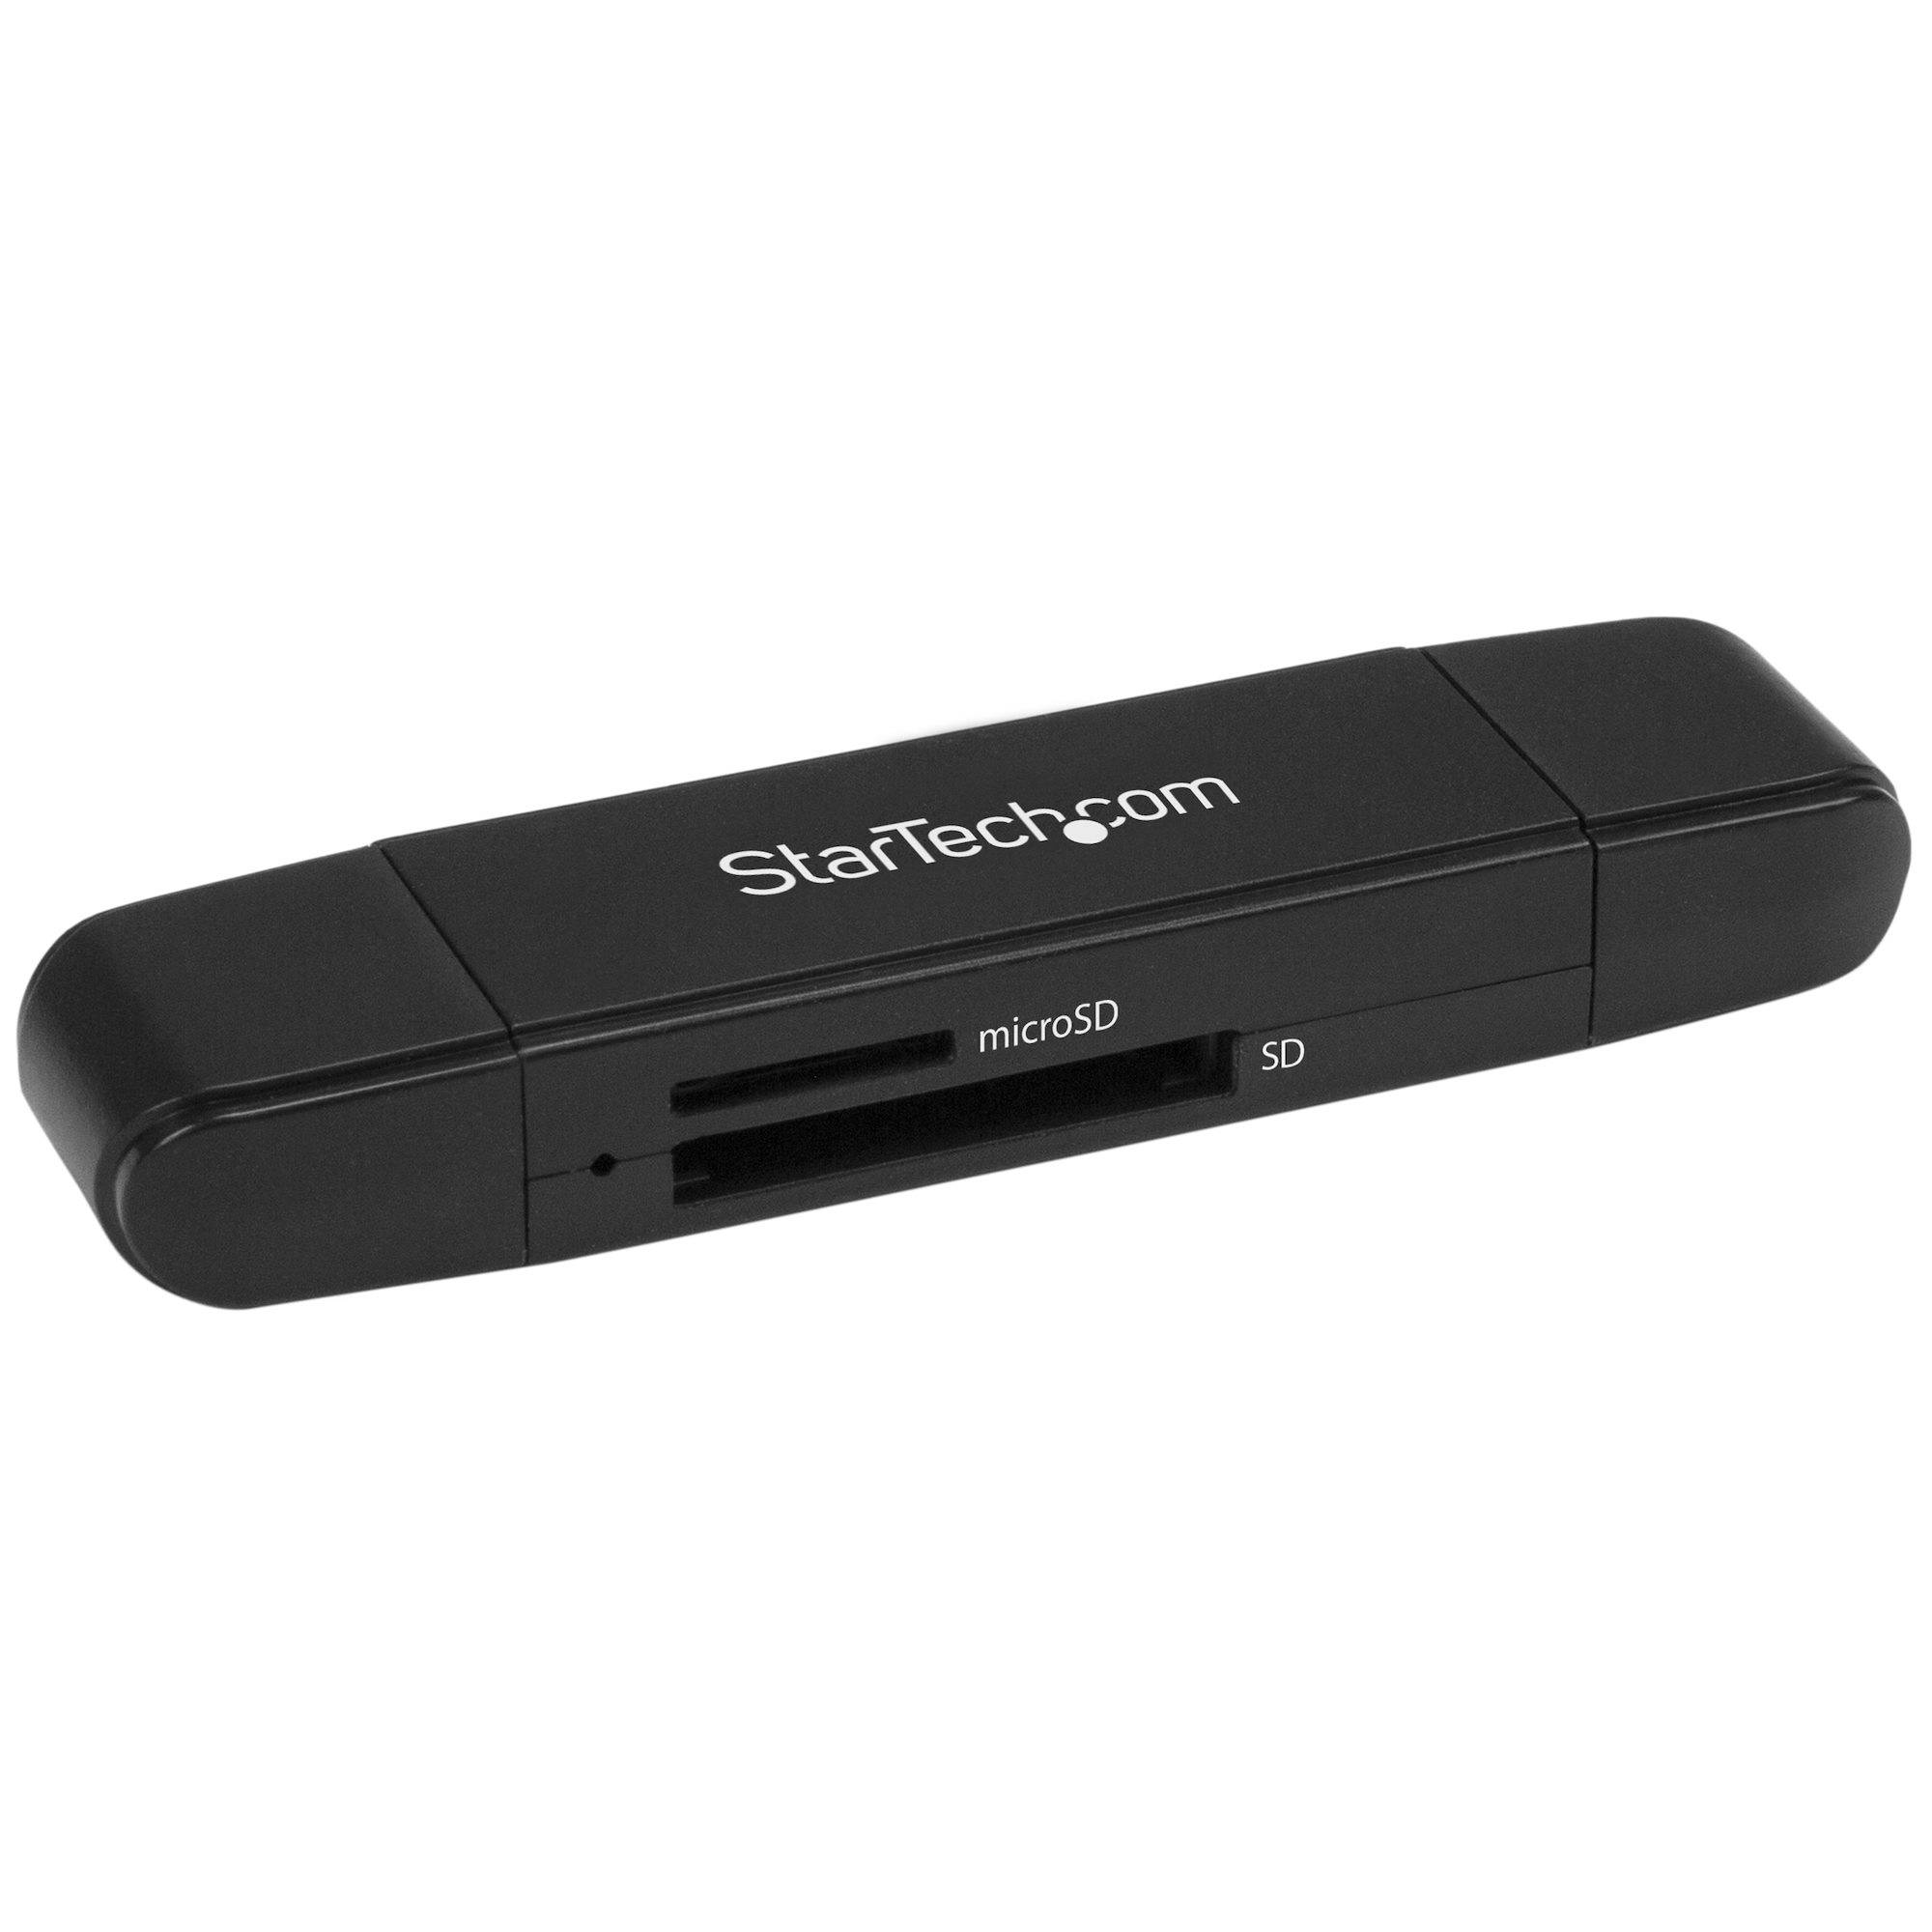 Rca Informatique - Image du produit : SD / MICROSD CARD READER - FOR USB-C AND USB-A ENABLED DEVICES